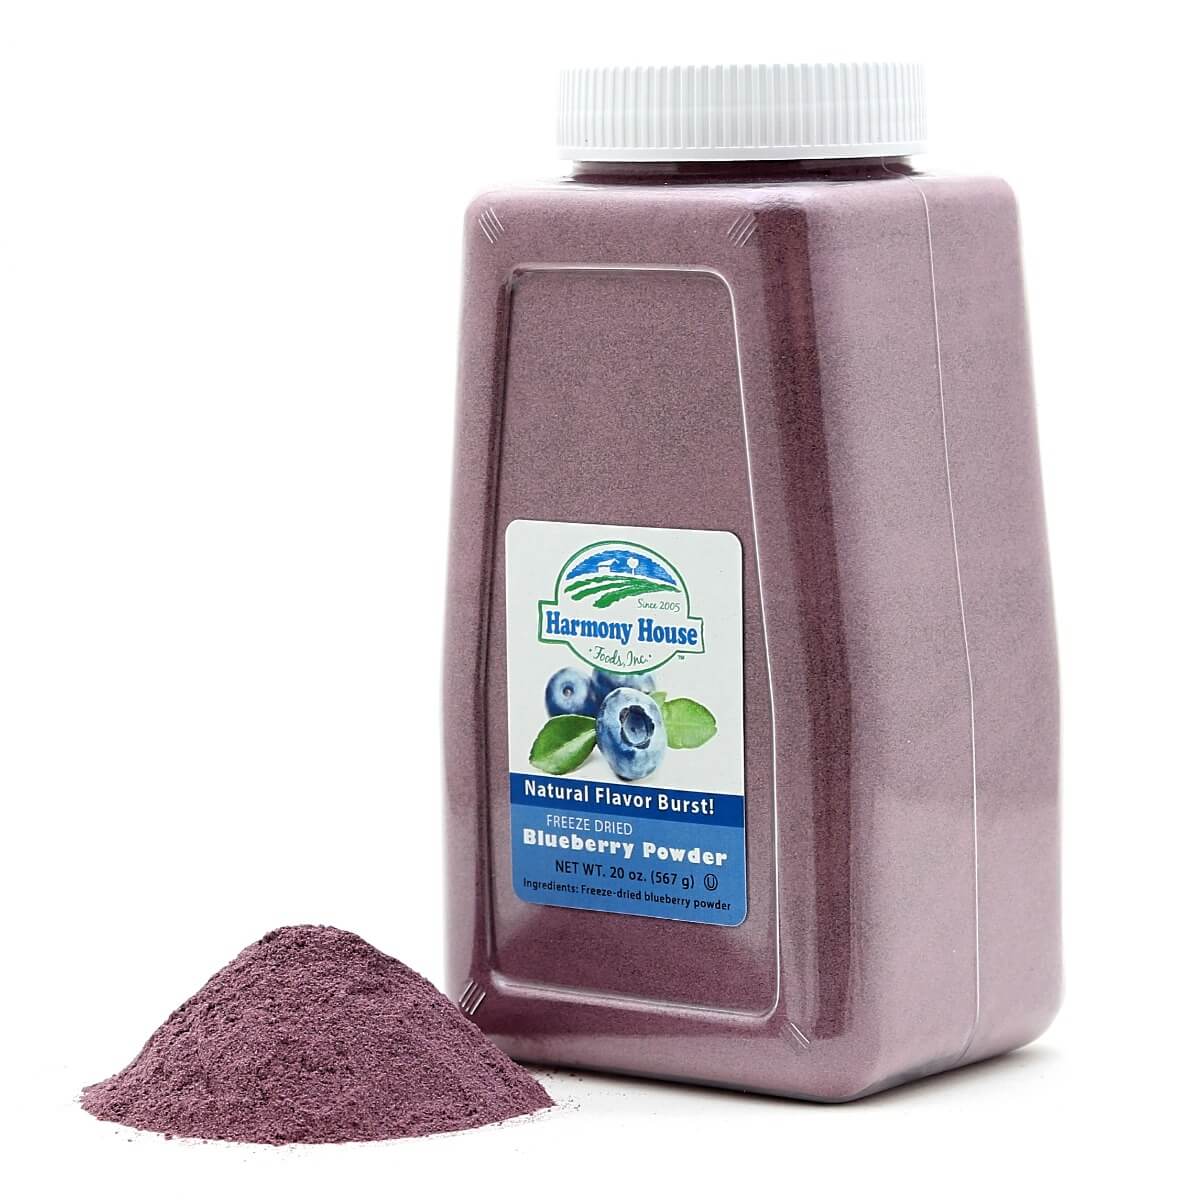 Harmony House Freeze Dried Blueberry Powder (4 Cups / 64 Tbs) - (SHIPS IN 1-2 WEEKS) jar with leaf.